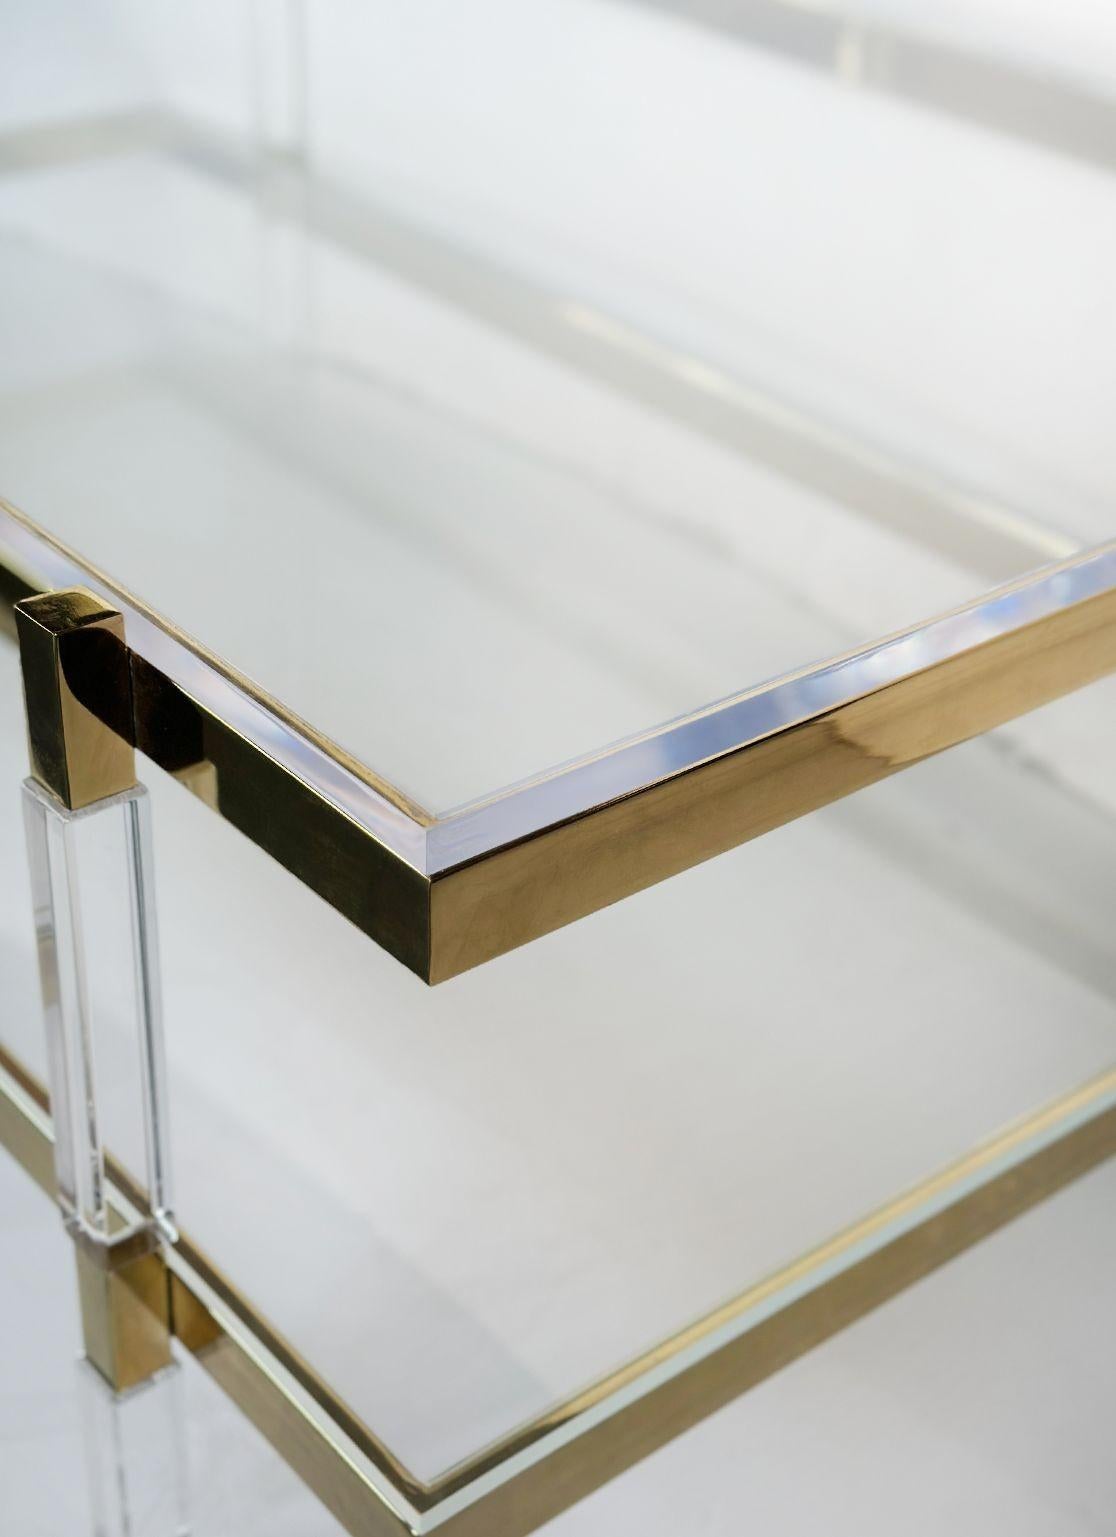 Vintage Two-tier lucite coffee table with brass frame and details by Charles Hollis Jones for his Metric Collection designed in 1960's.
The table's most striking feature is its elegant use of lucite, a material known for its transparency and